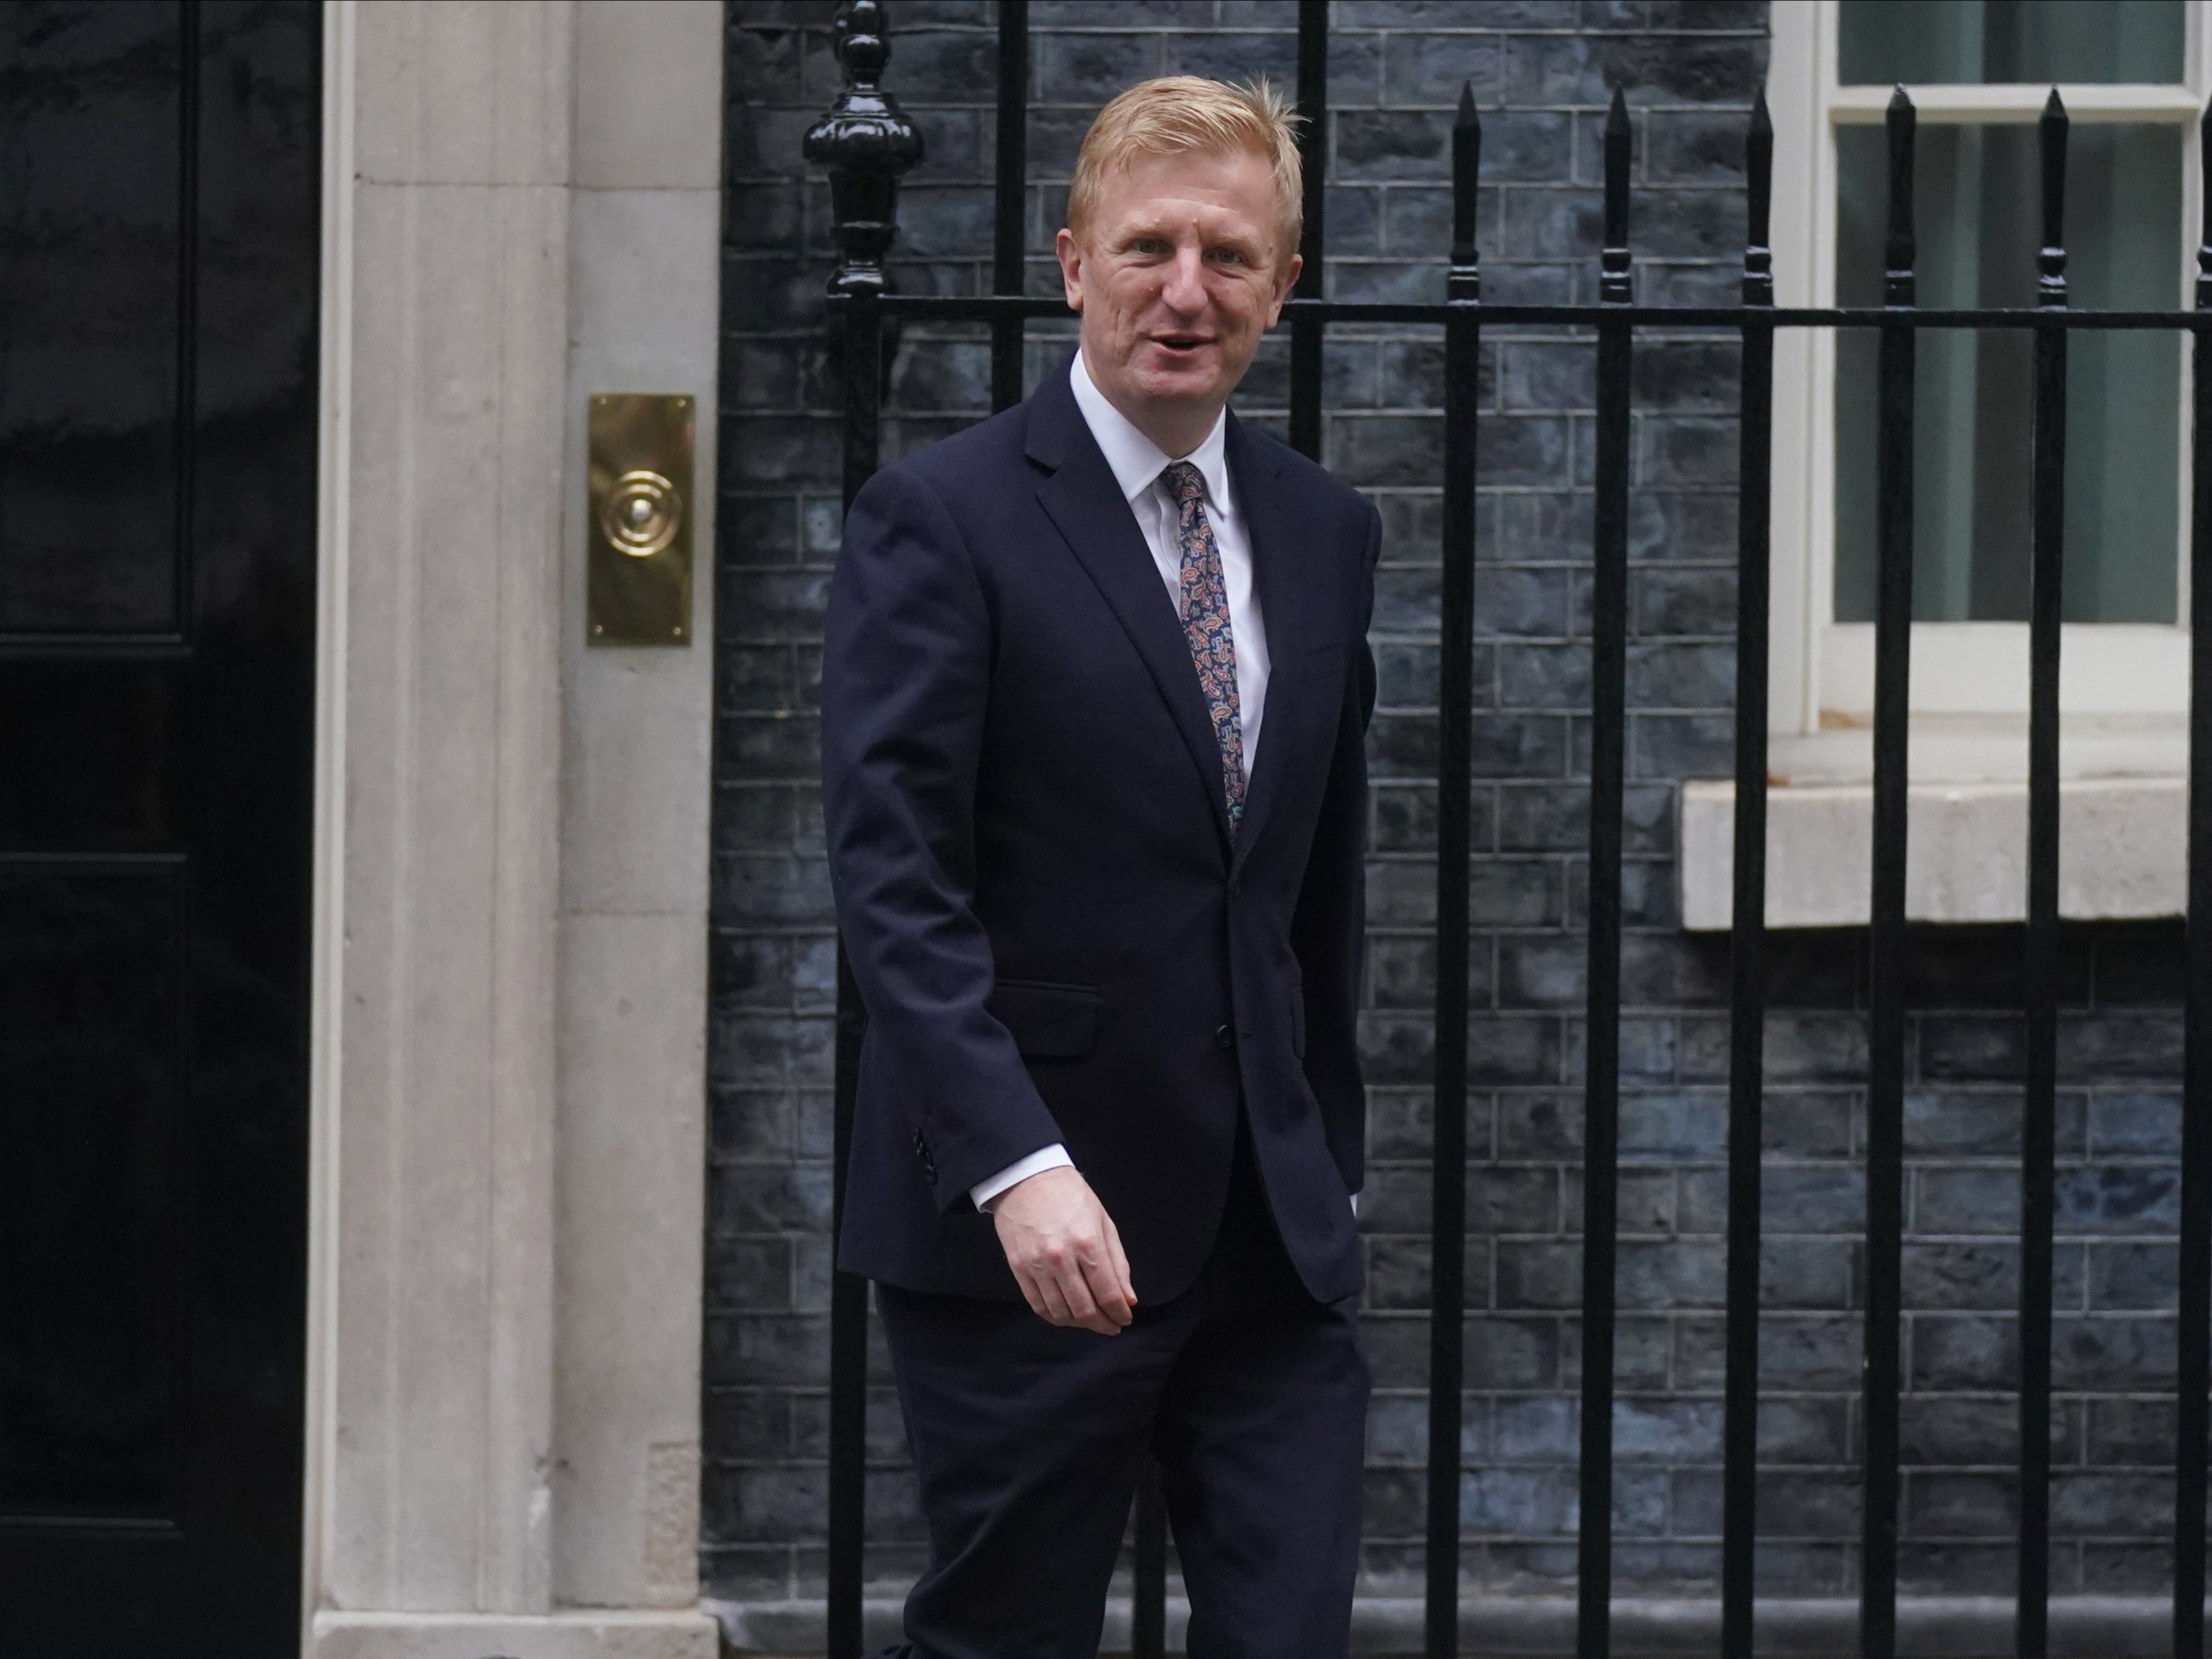 Deputy PM Oliver Dowden said he could not rule out that payments were made to an alleged victim